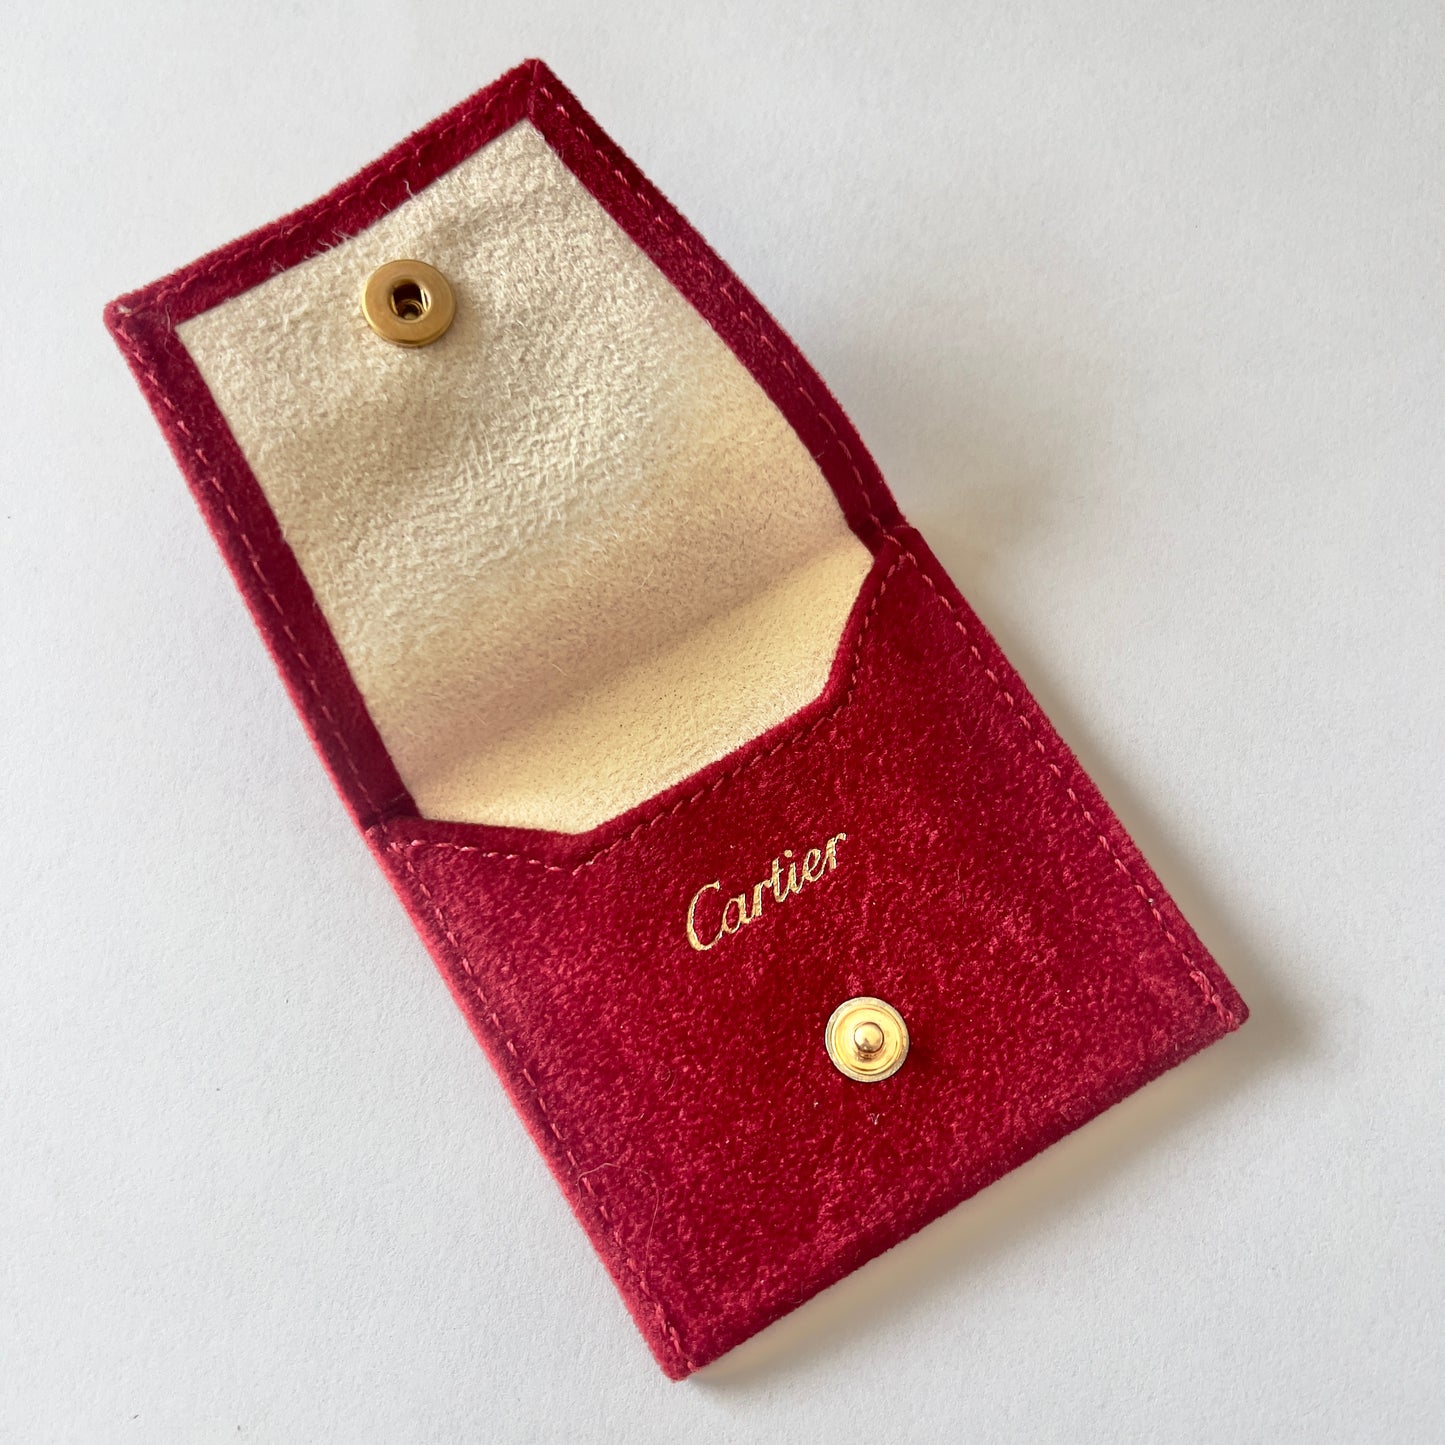 CARTIER Red Faux Suede Jewelry Pouch 2.75x2.5 inches